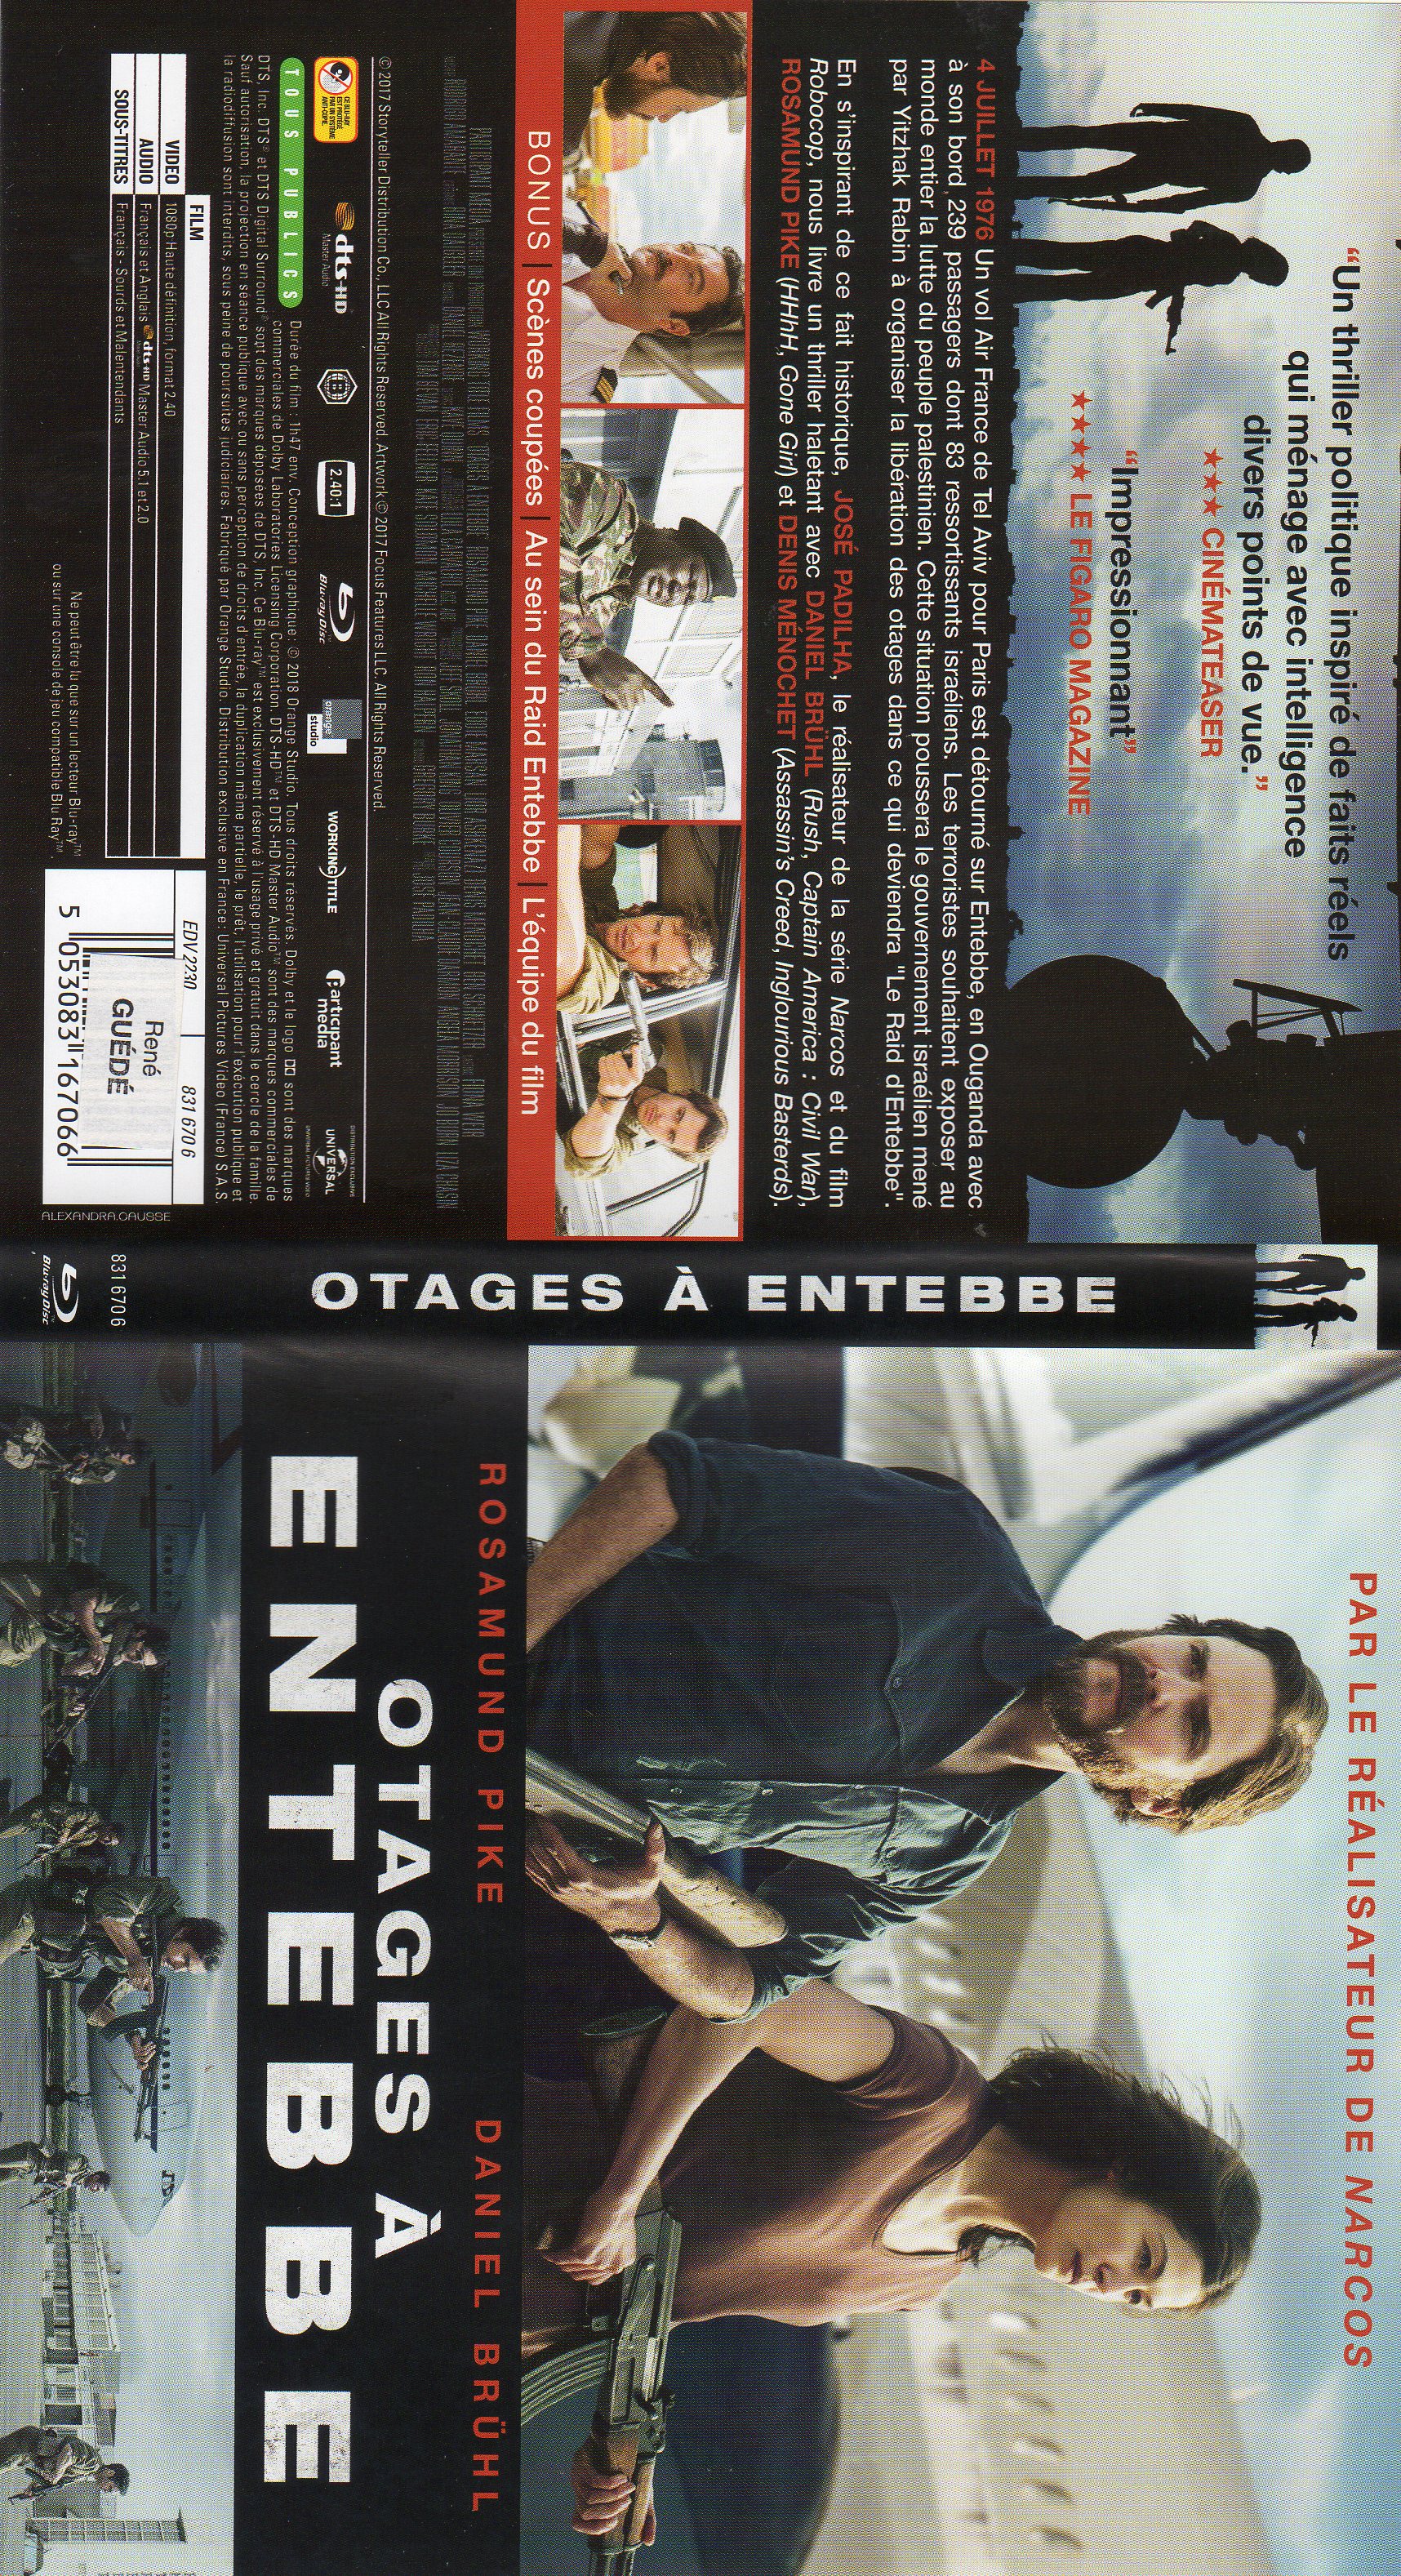 Jaquette DVD Otages  Entebbe (BLU-RAY)